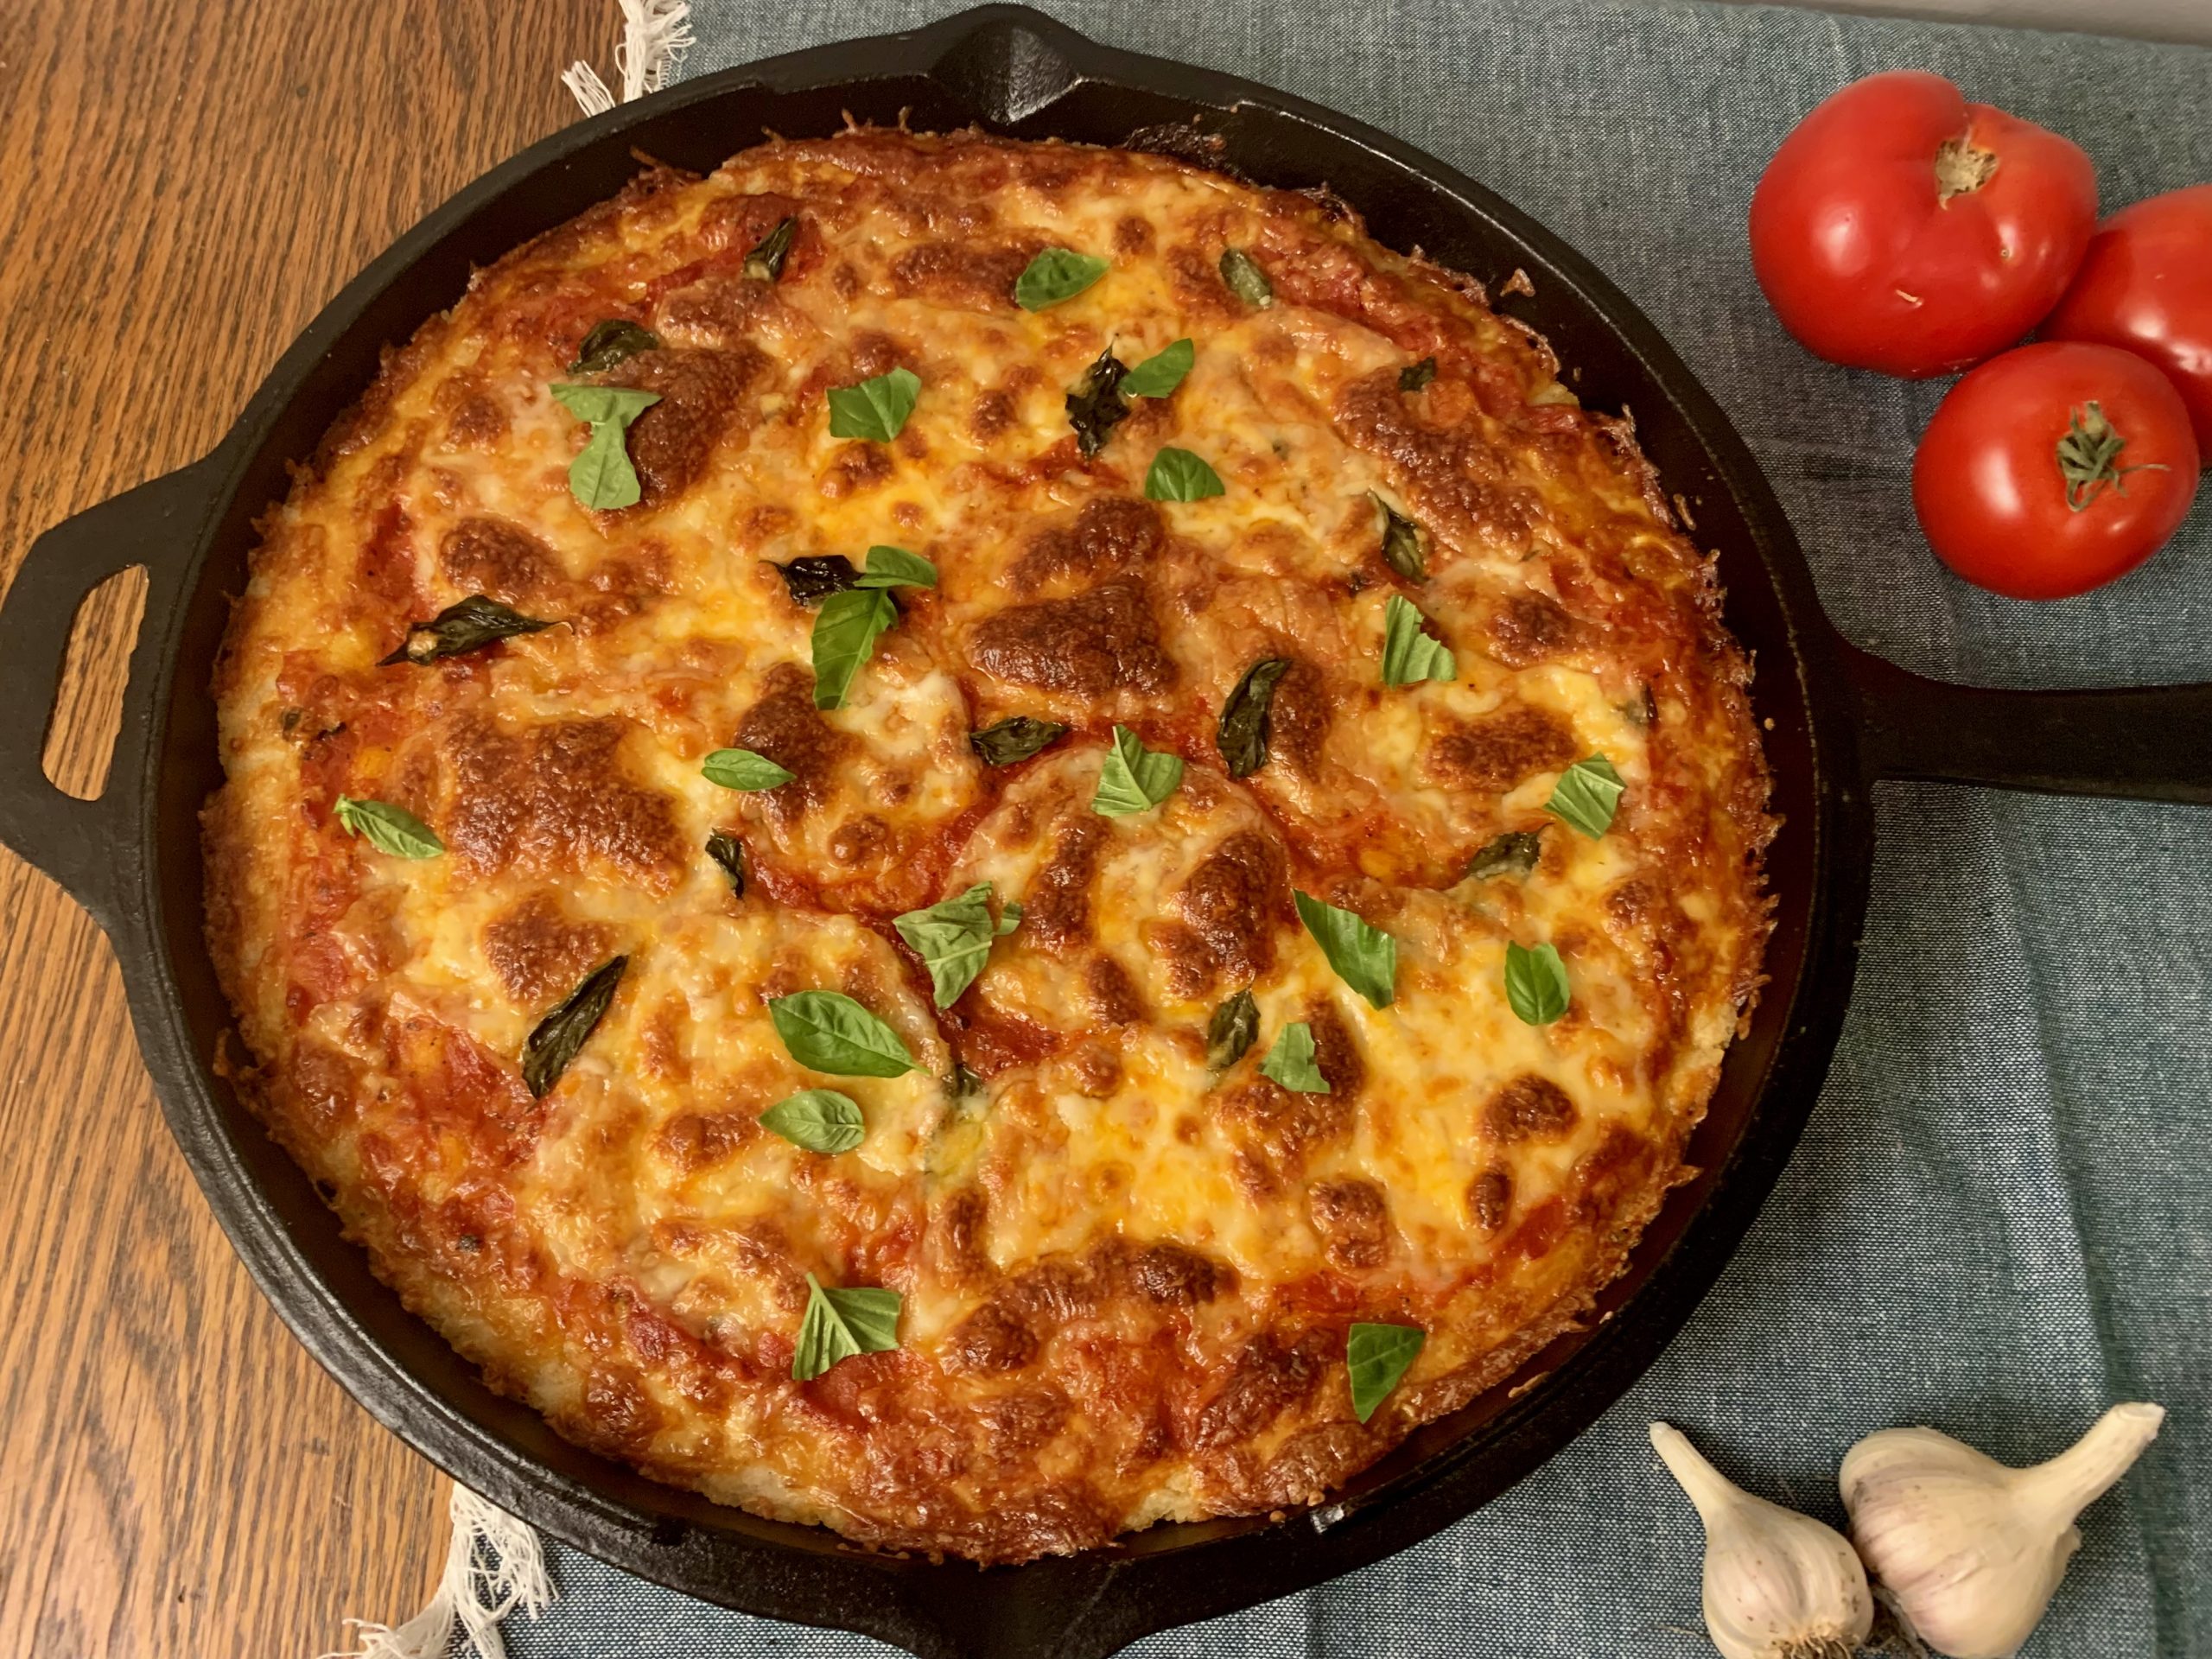 Free From Gluten - Cast-Iron Margherita Pizza with Cheesy Crust